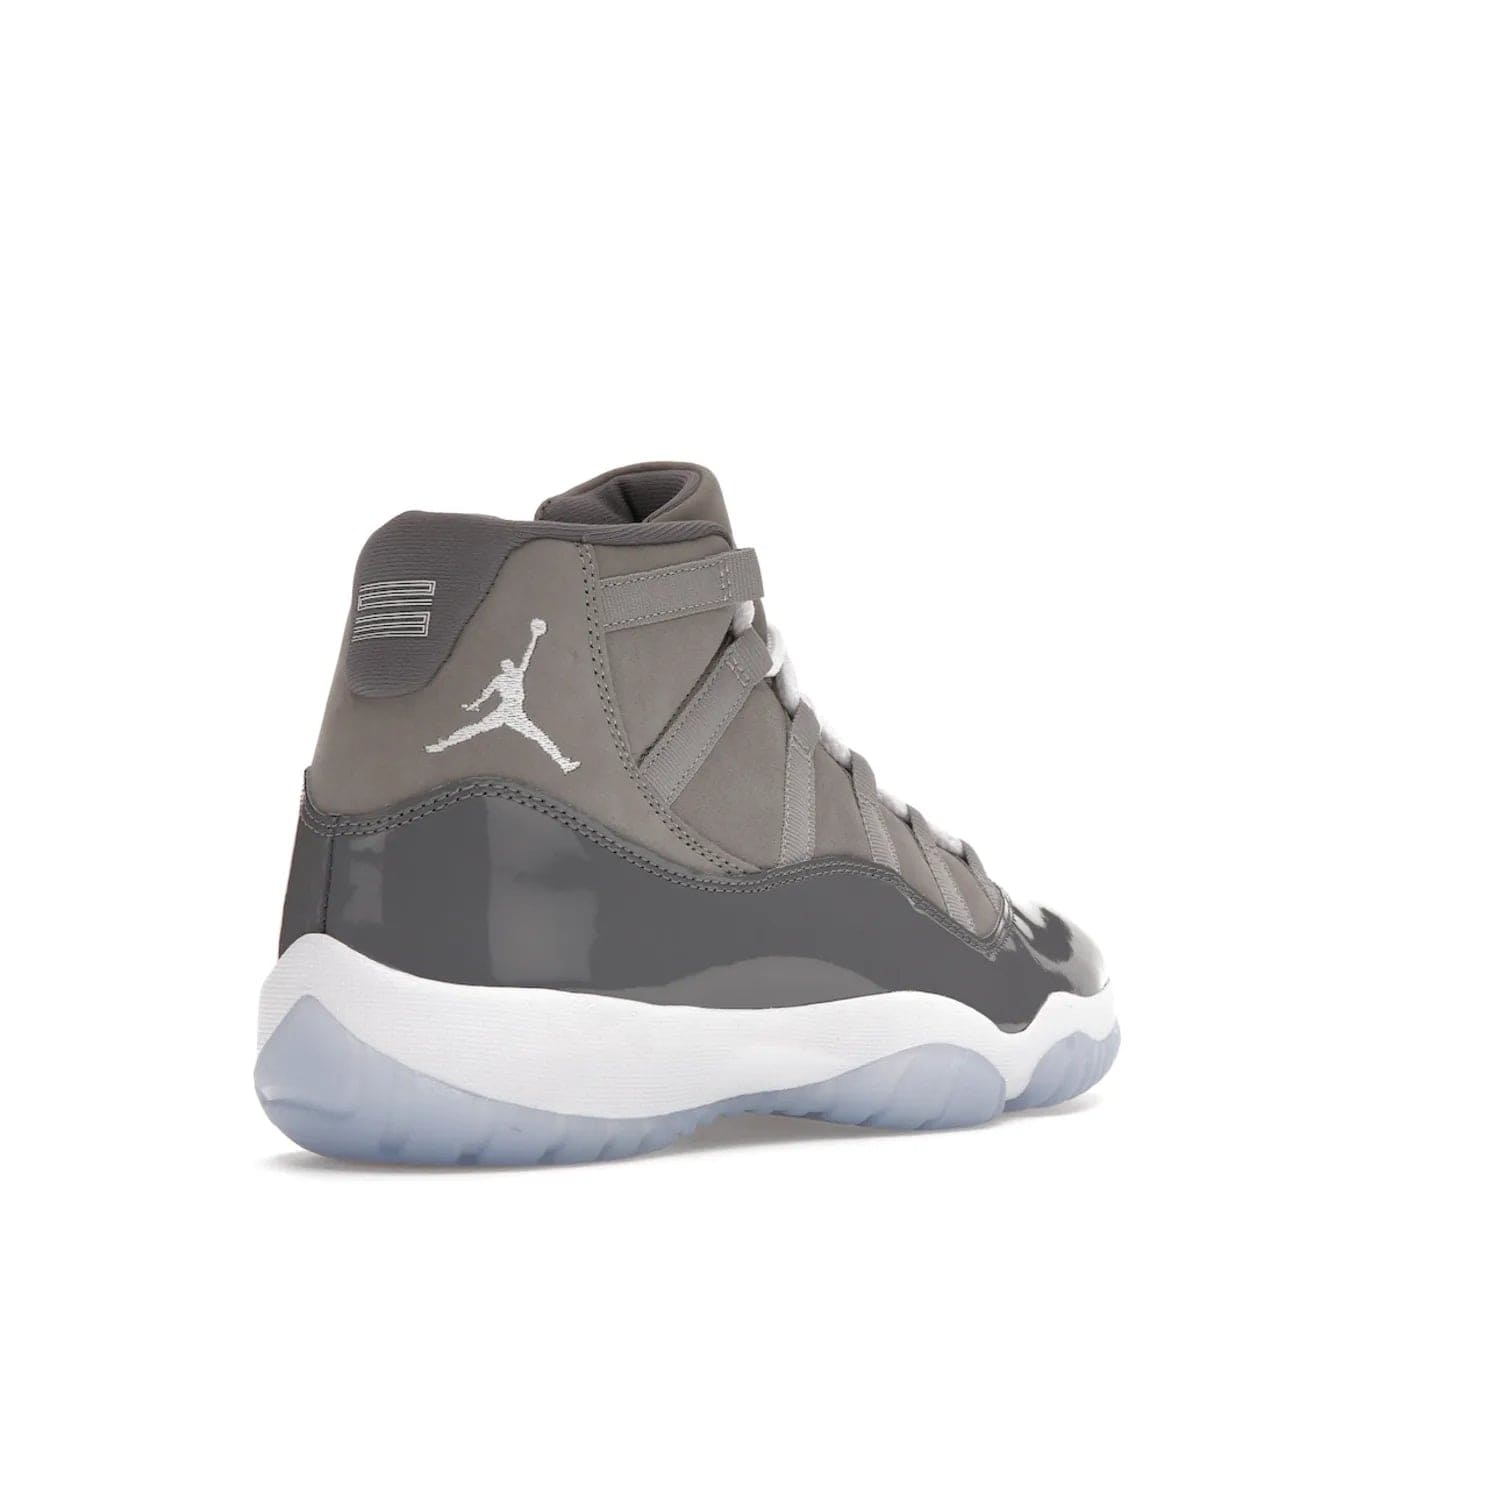 Jordan 11 Retro Cool Grey (2021) - Image 32 - Only at www.BallersClubKickz.com - Shop the Air Jordan 11 Retro Cool Grey (2021) for a must-have sneaker with a Cool Grey Durabuck upper, patent leather overlays, signature Jumpman embroidery, a white midsole, icy blue translucent outsole, and Multi-Color accents.  Released in December 2021 for $225.